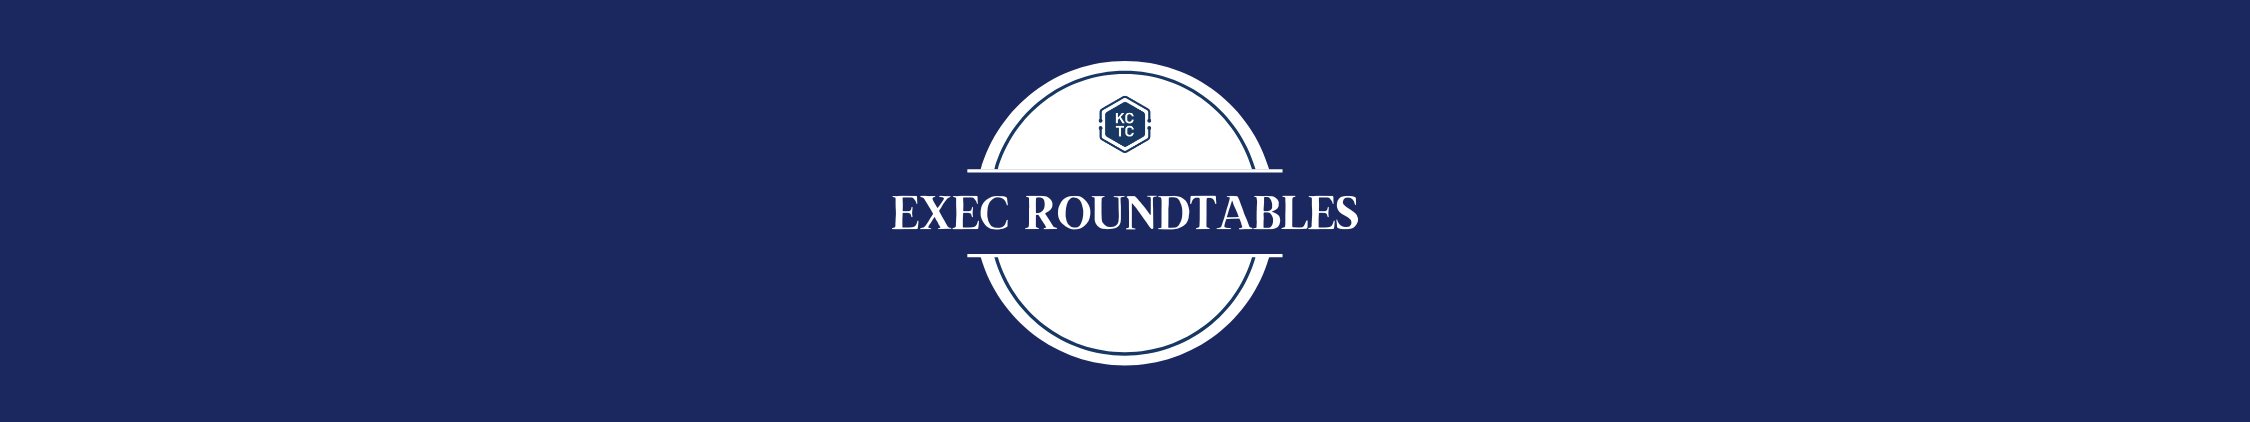 Exec Roundtables Banner